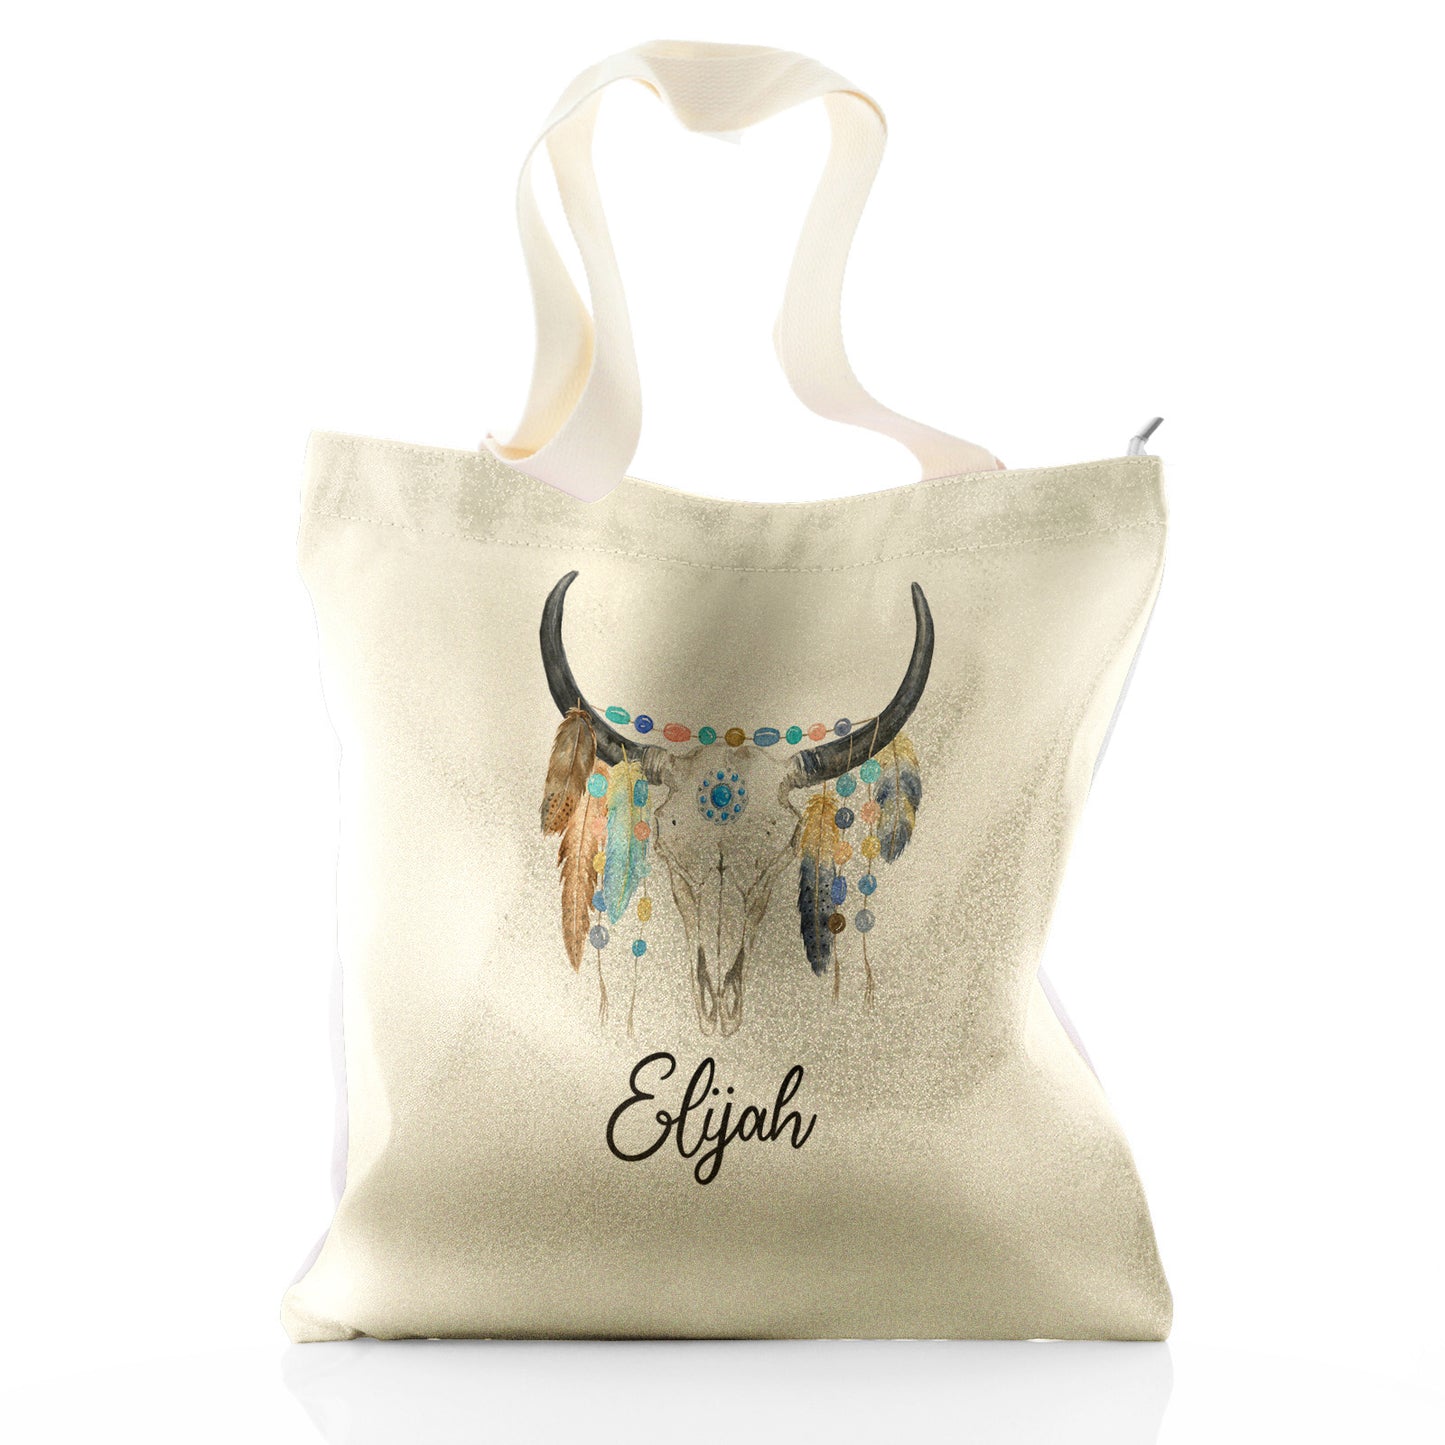 Personalised Glitter Tote Bag with Cow Skull Feathers and Cute Text